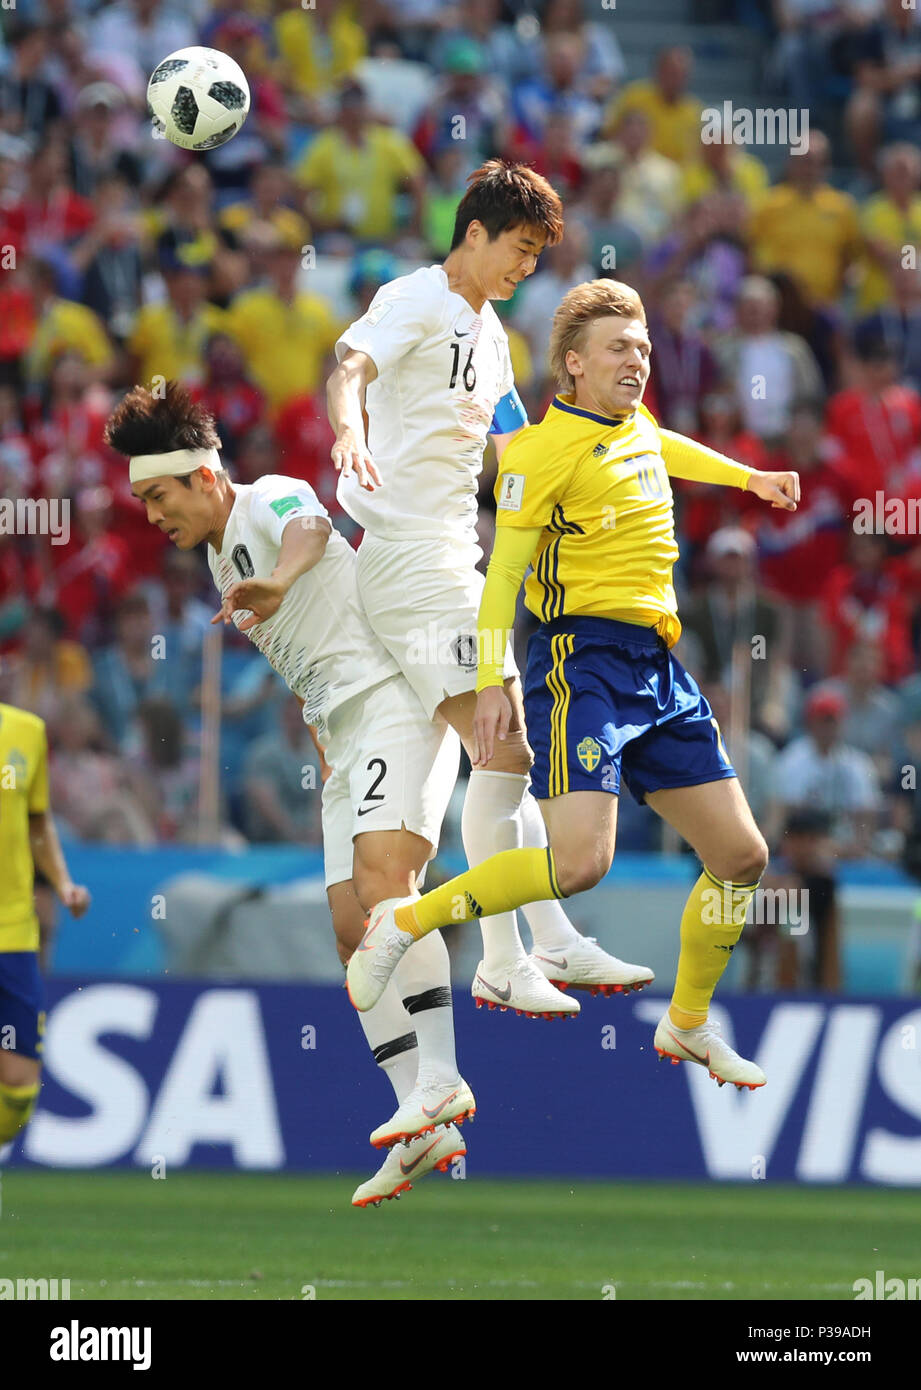 Nizhny Novgorod, Russia. 18th June, 2018. Ki Sungyueng (C) of South Korea vies with Emil Forsberg (R) of Sweden during a group F match between Sweden and South Korea at the 2018 FIFA World Cup in Nizhny Novgorod, Russia, June 18, 2018. Credit: Yang Lei/Xinhua/Alamy Live News Stock Photo